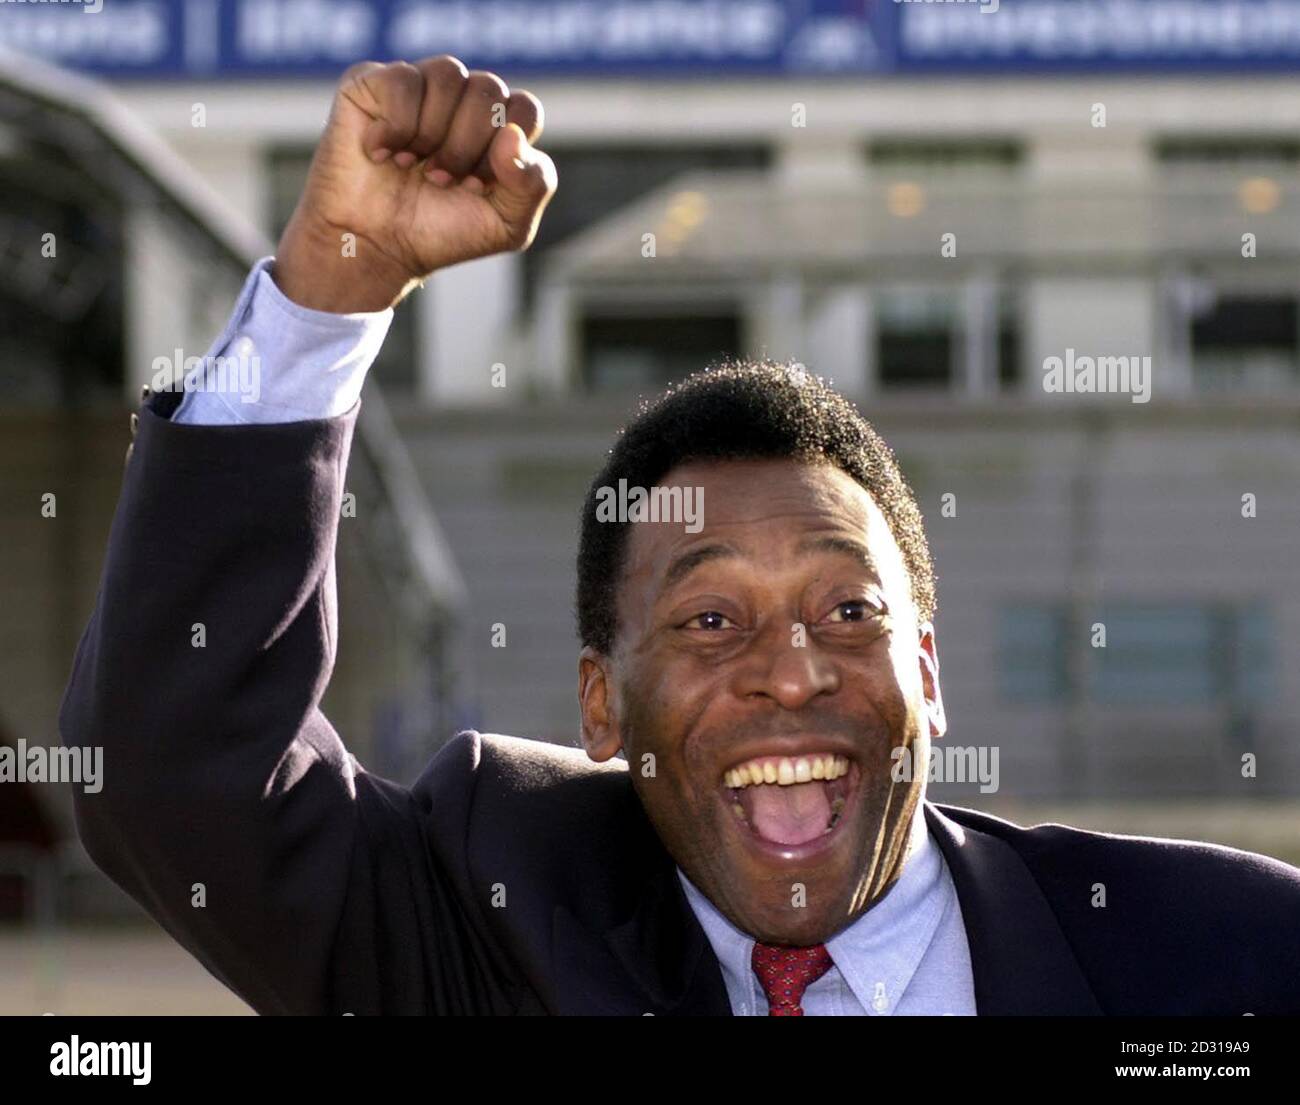 23rd OCTOBER:On this day in 1940 Football legend Pele was born. Former football legend, Pele outside Wembley stadium, North London. Pele will be attending a Salute to Wembley, Final Ball with 2,000 invited guests who are hoping to raise  1 million in aid of the NSPCC FULL STOP Campaign.   *02/11/2000 Wembley stadium may have bid a final farewell to football but the famous twin towers are to have one last musical swan song as Sir Elton John hosts a star-studded charity concert. Pele, who never had the chance to play at Wembley, will kick the final ball. Stock Photo